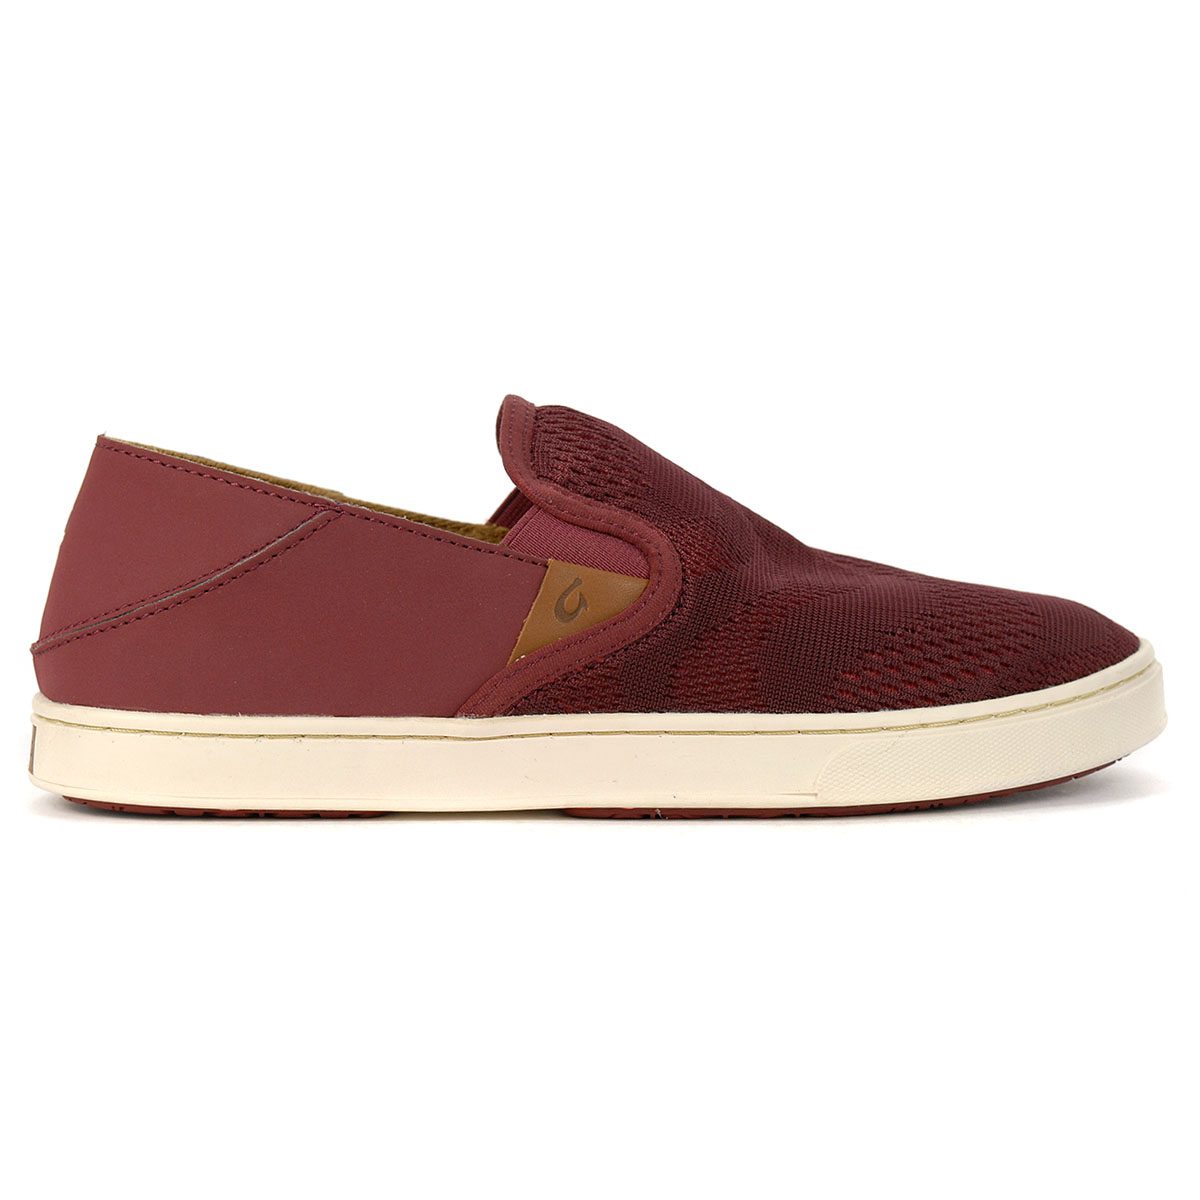 OluKai Women's Pehuea Red Ginger/Rose Wood Casual Slip-On Shoes